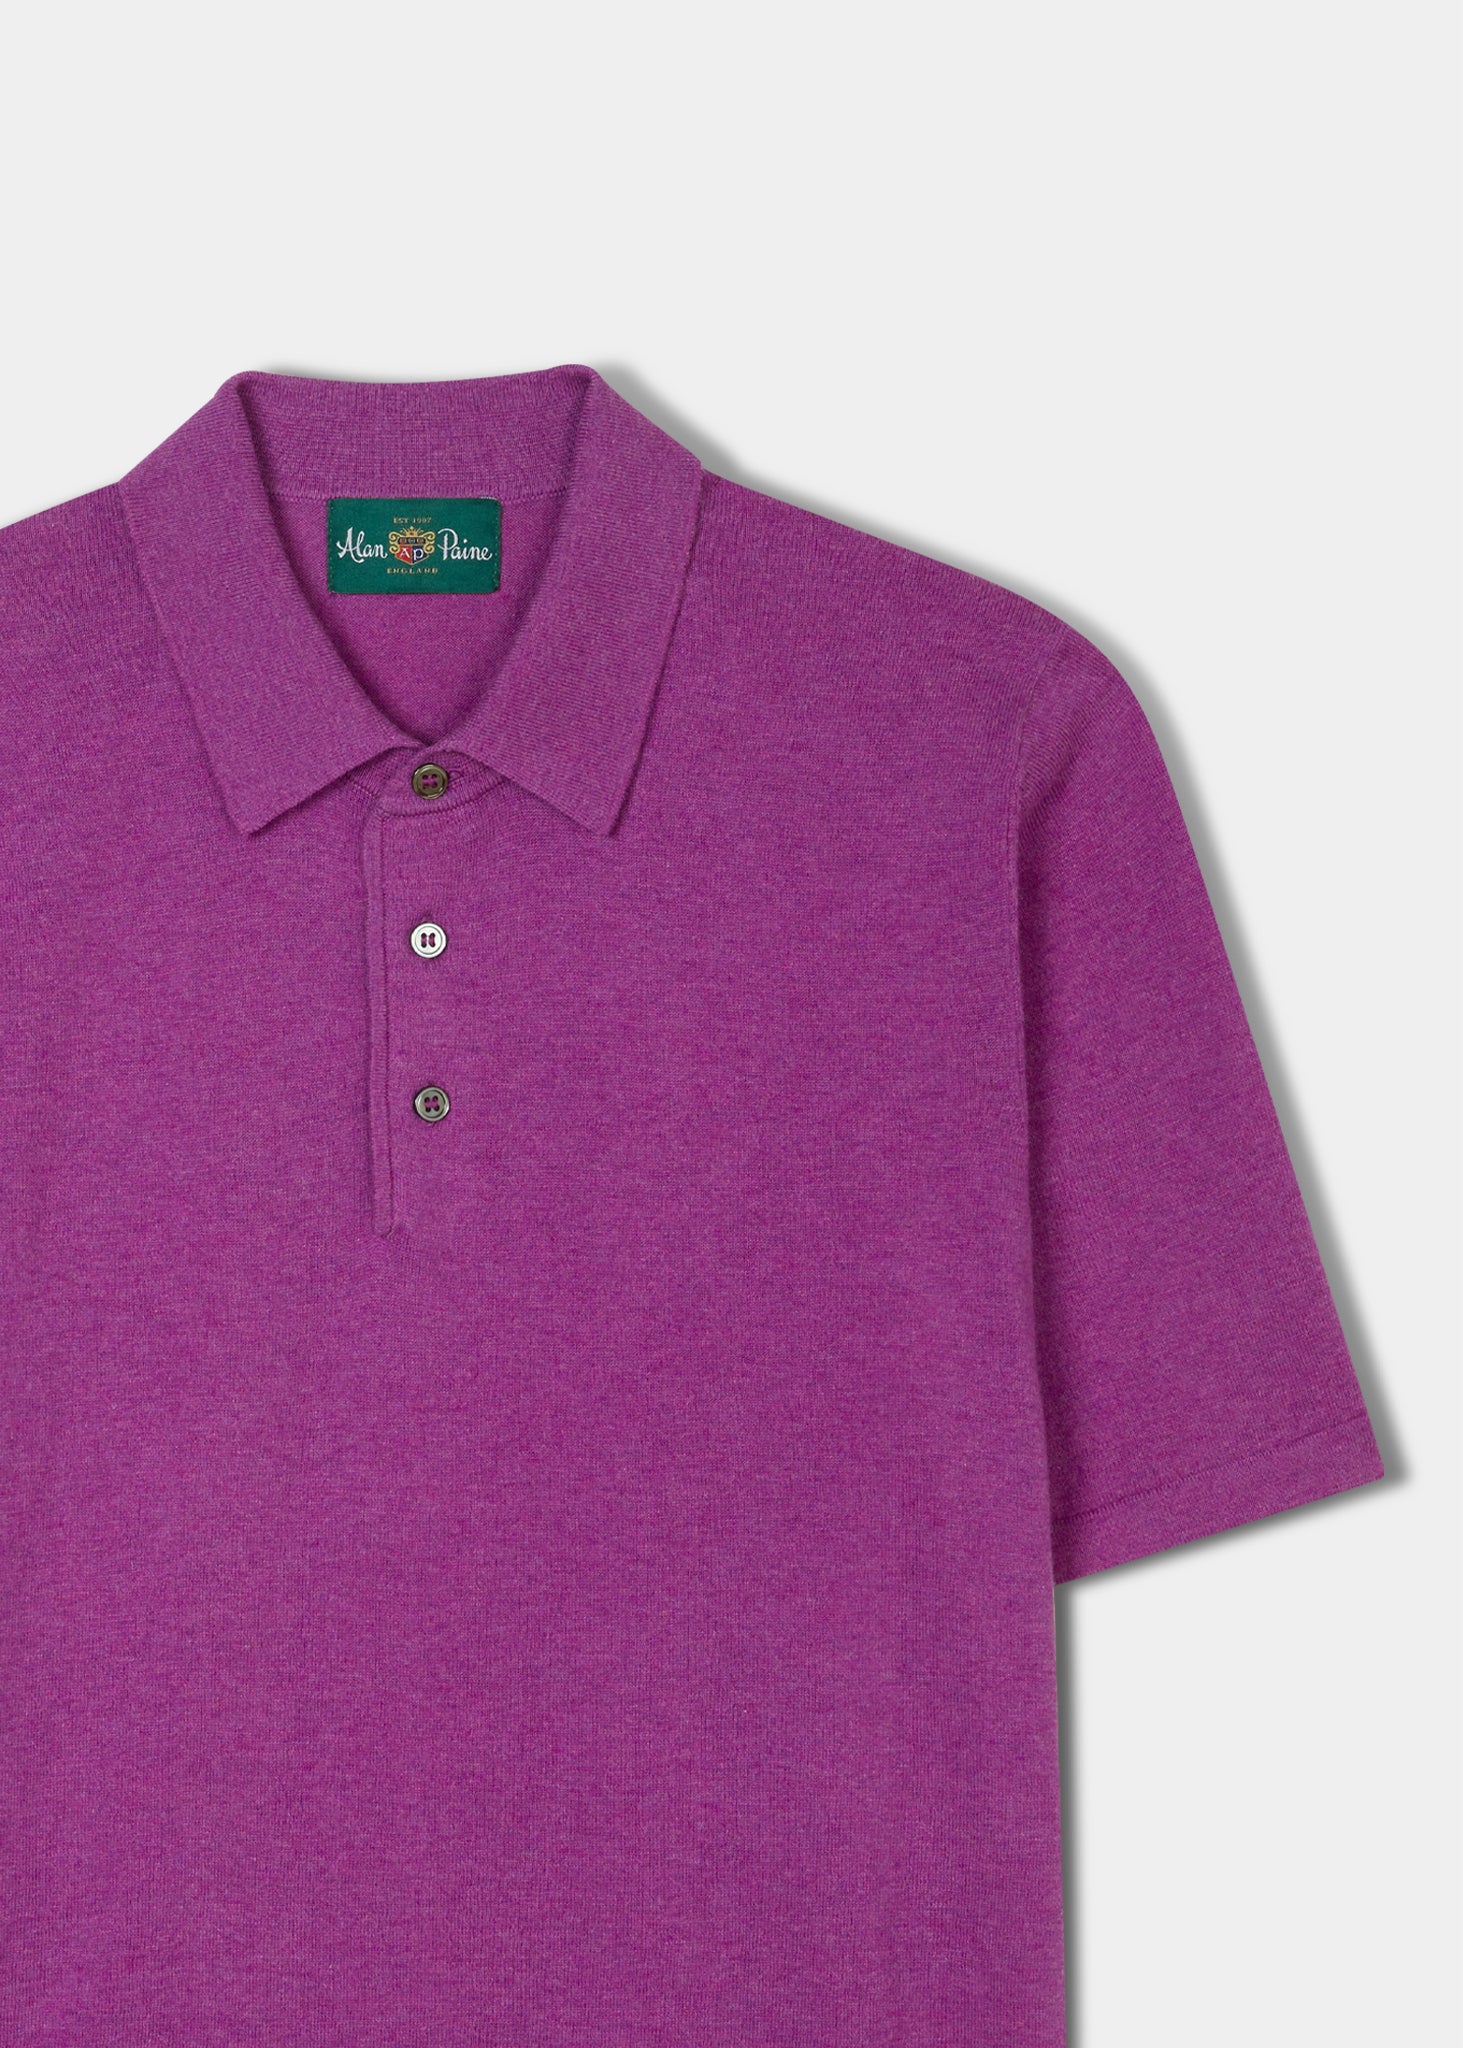 Men's luxury cotton short sleeve polo shirt in orchid